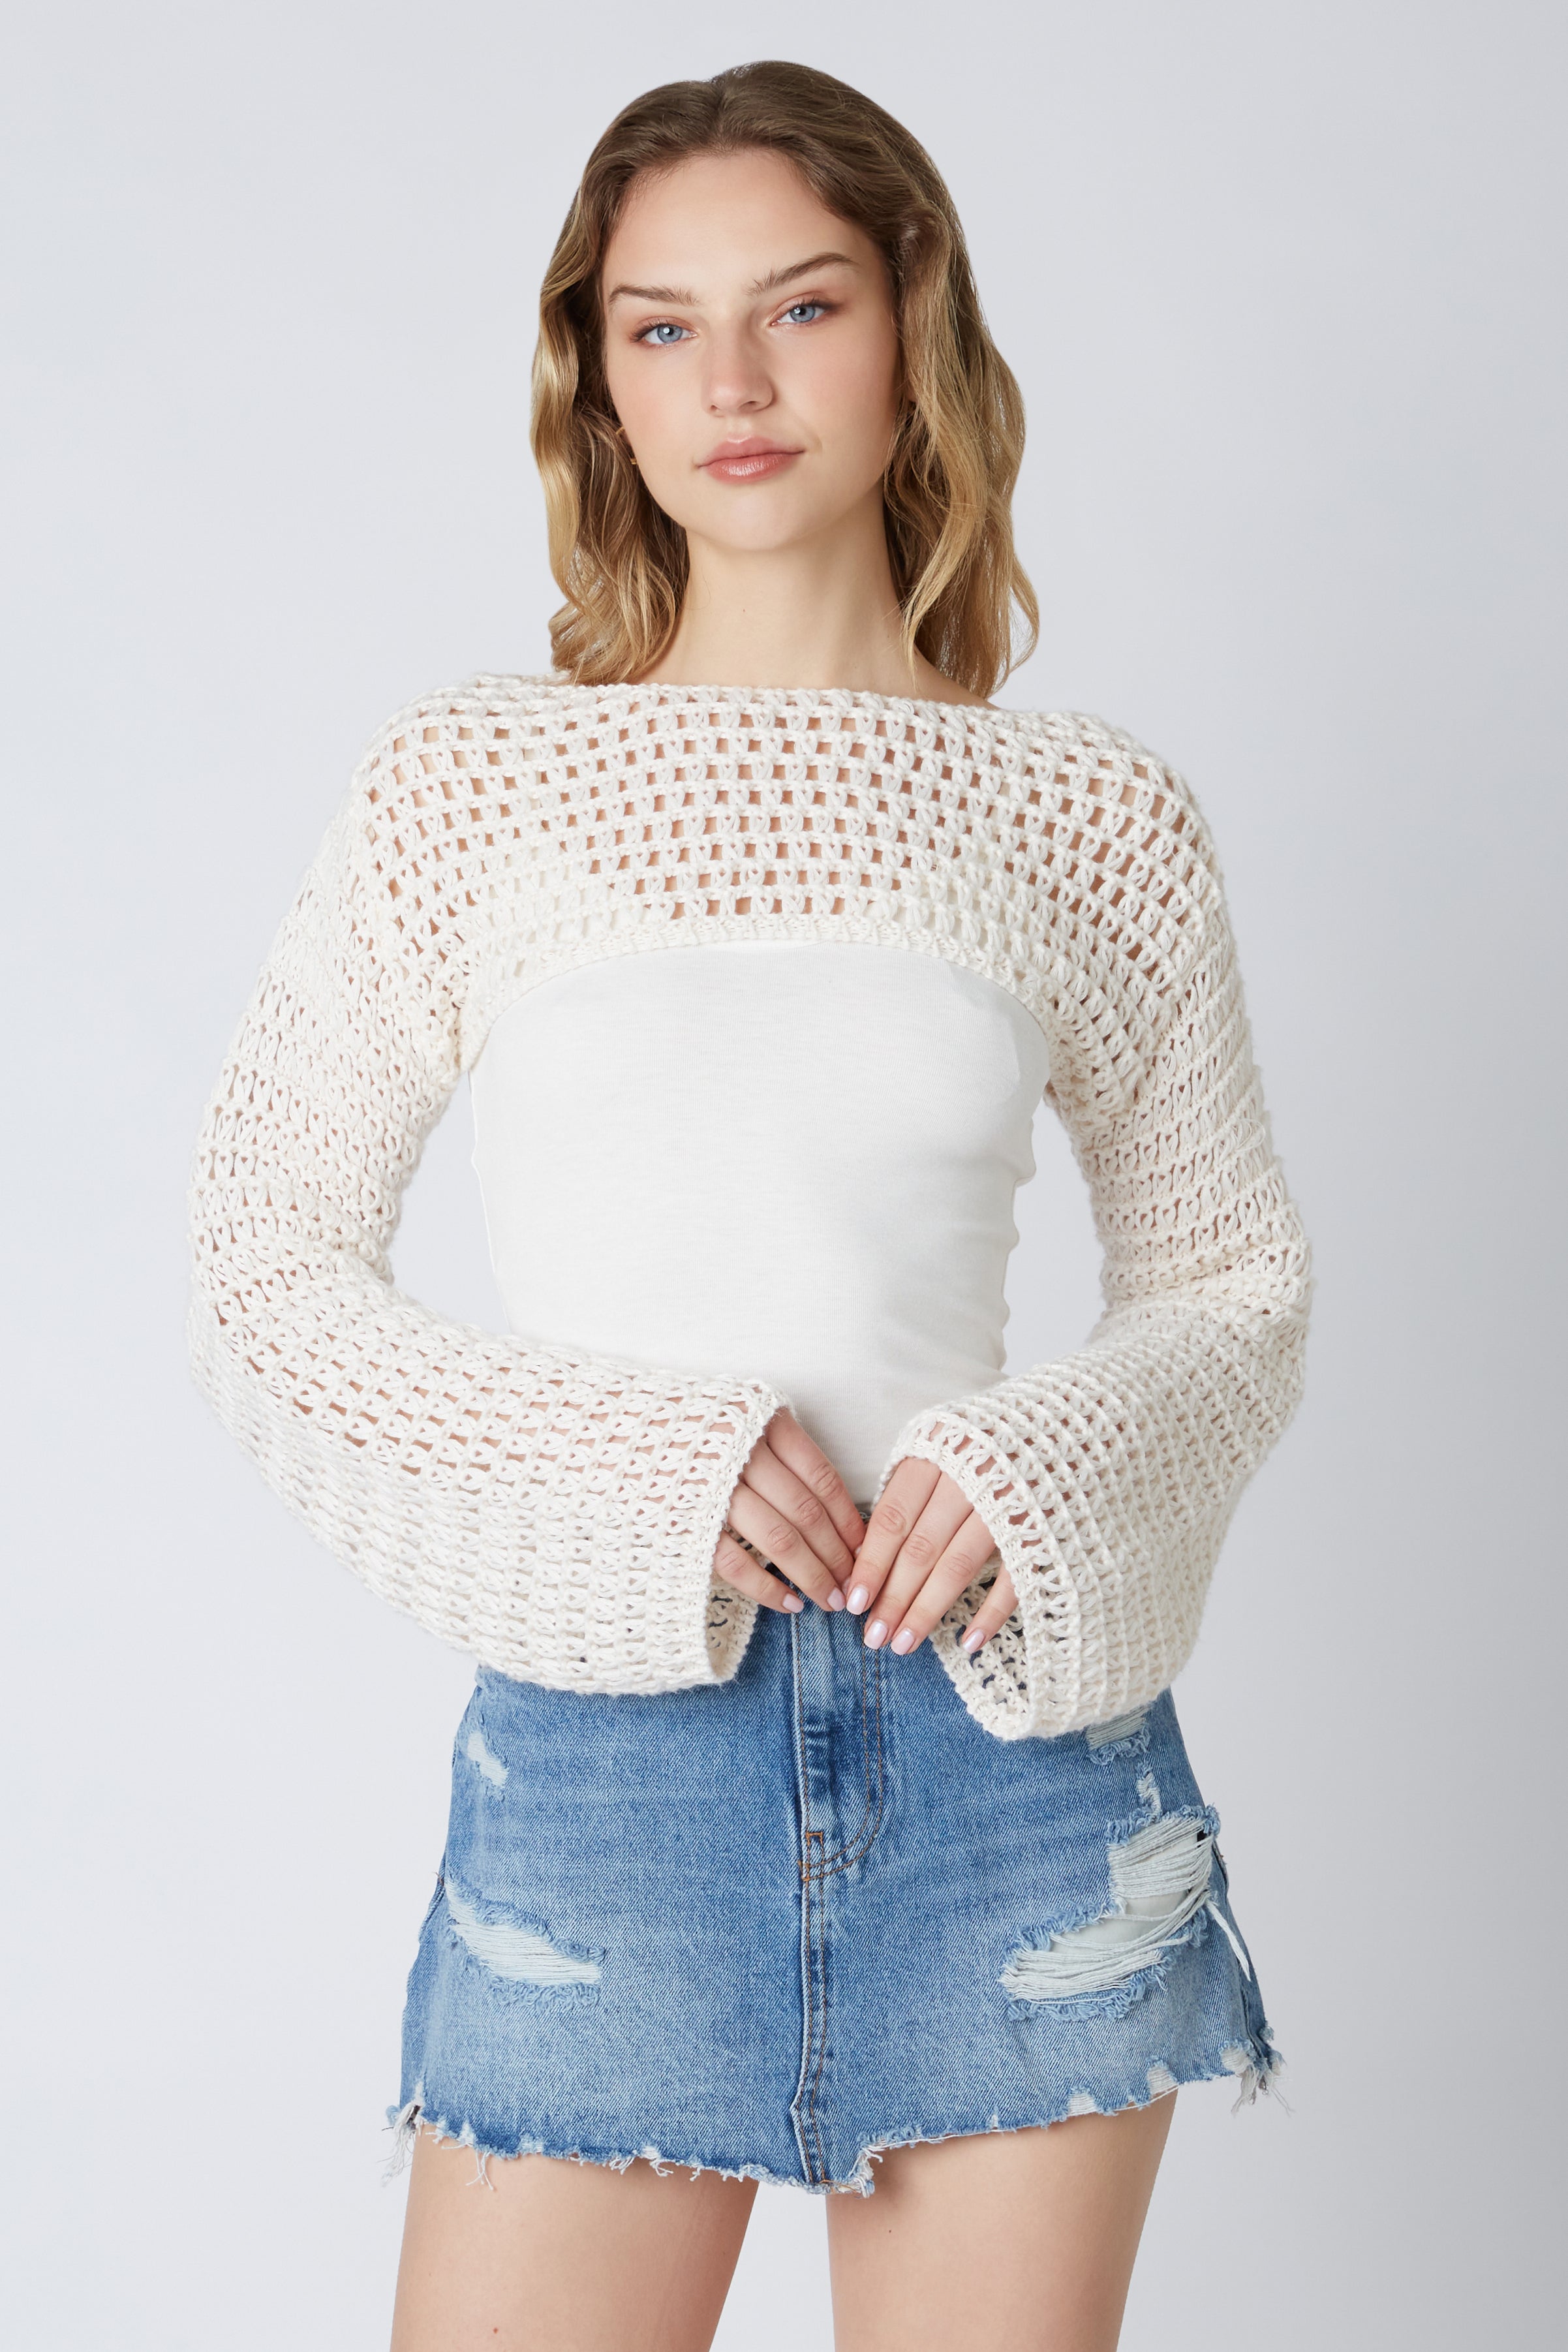 Open Knit Shrug in White Front